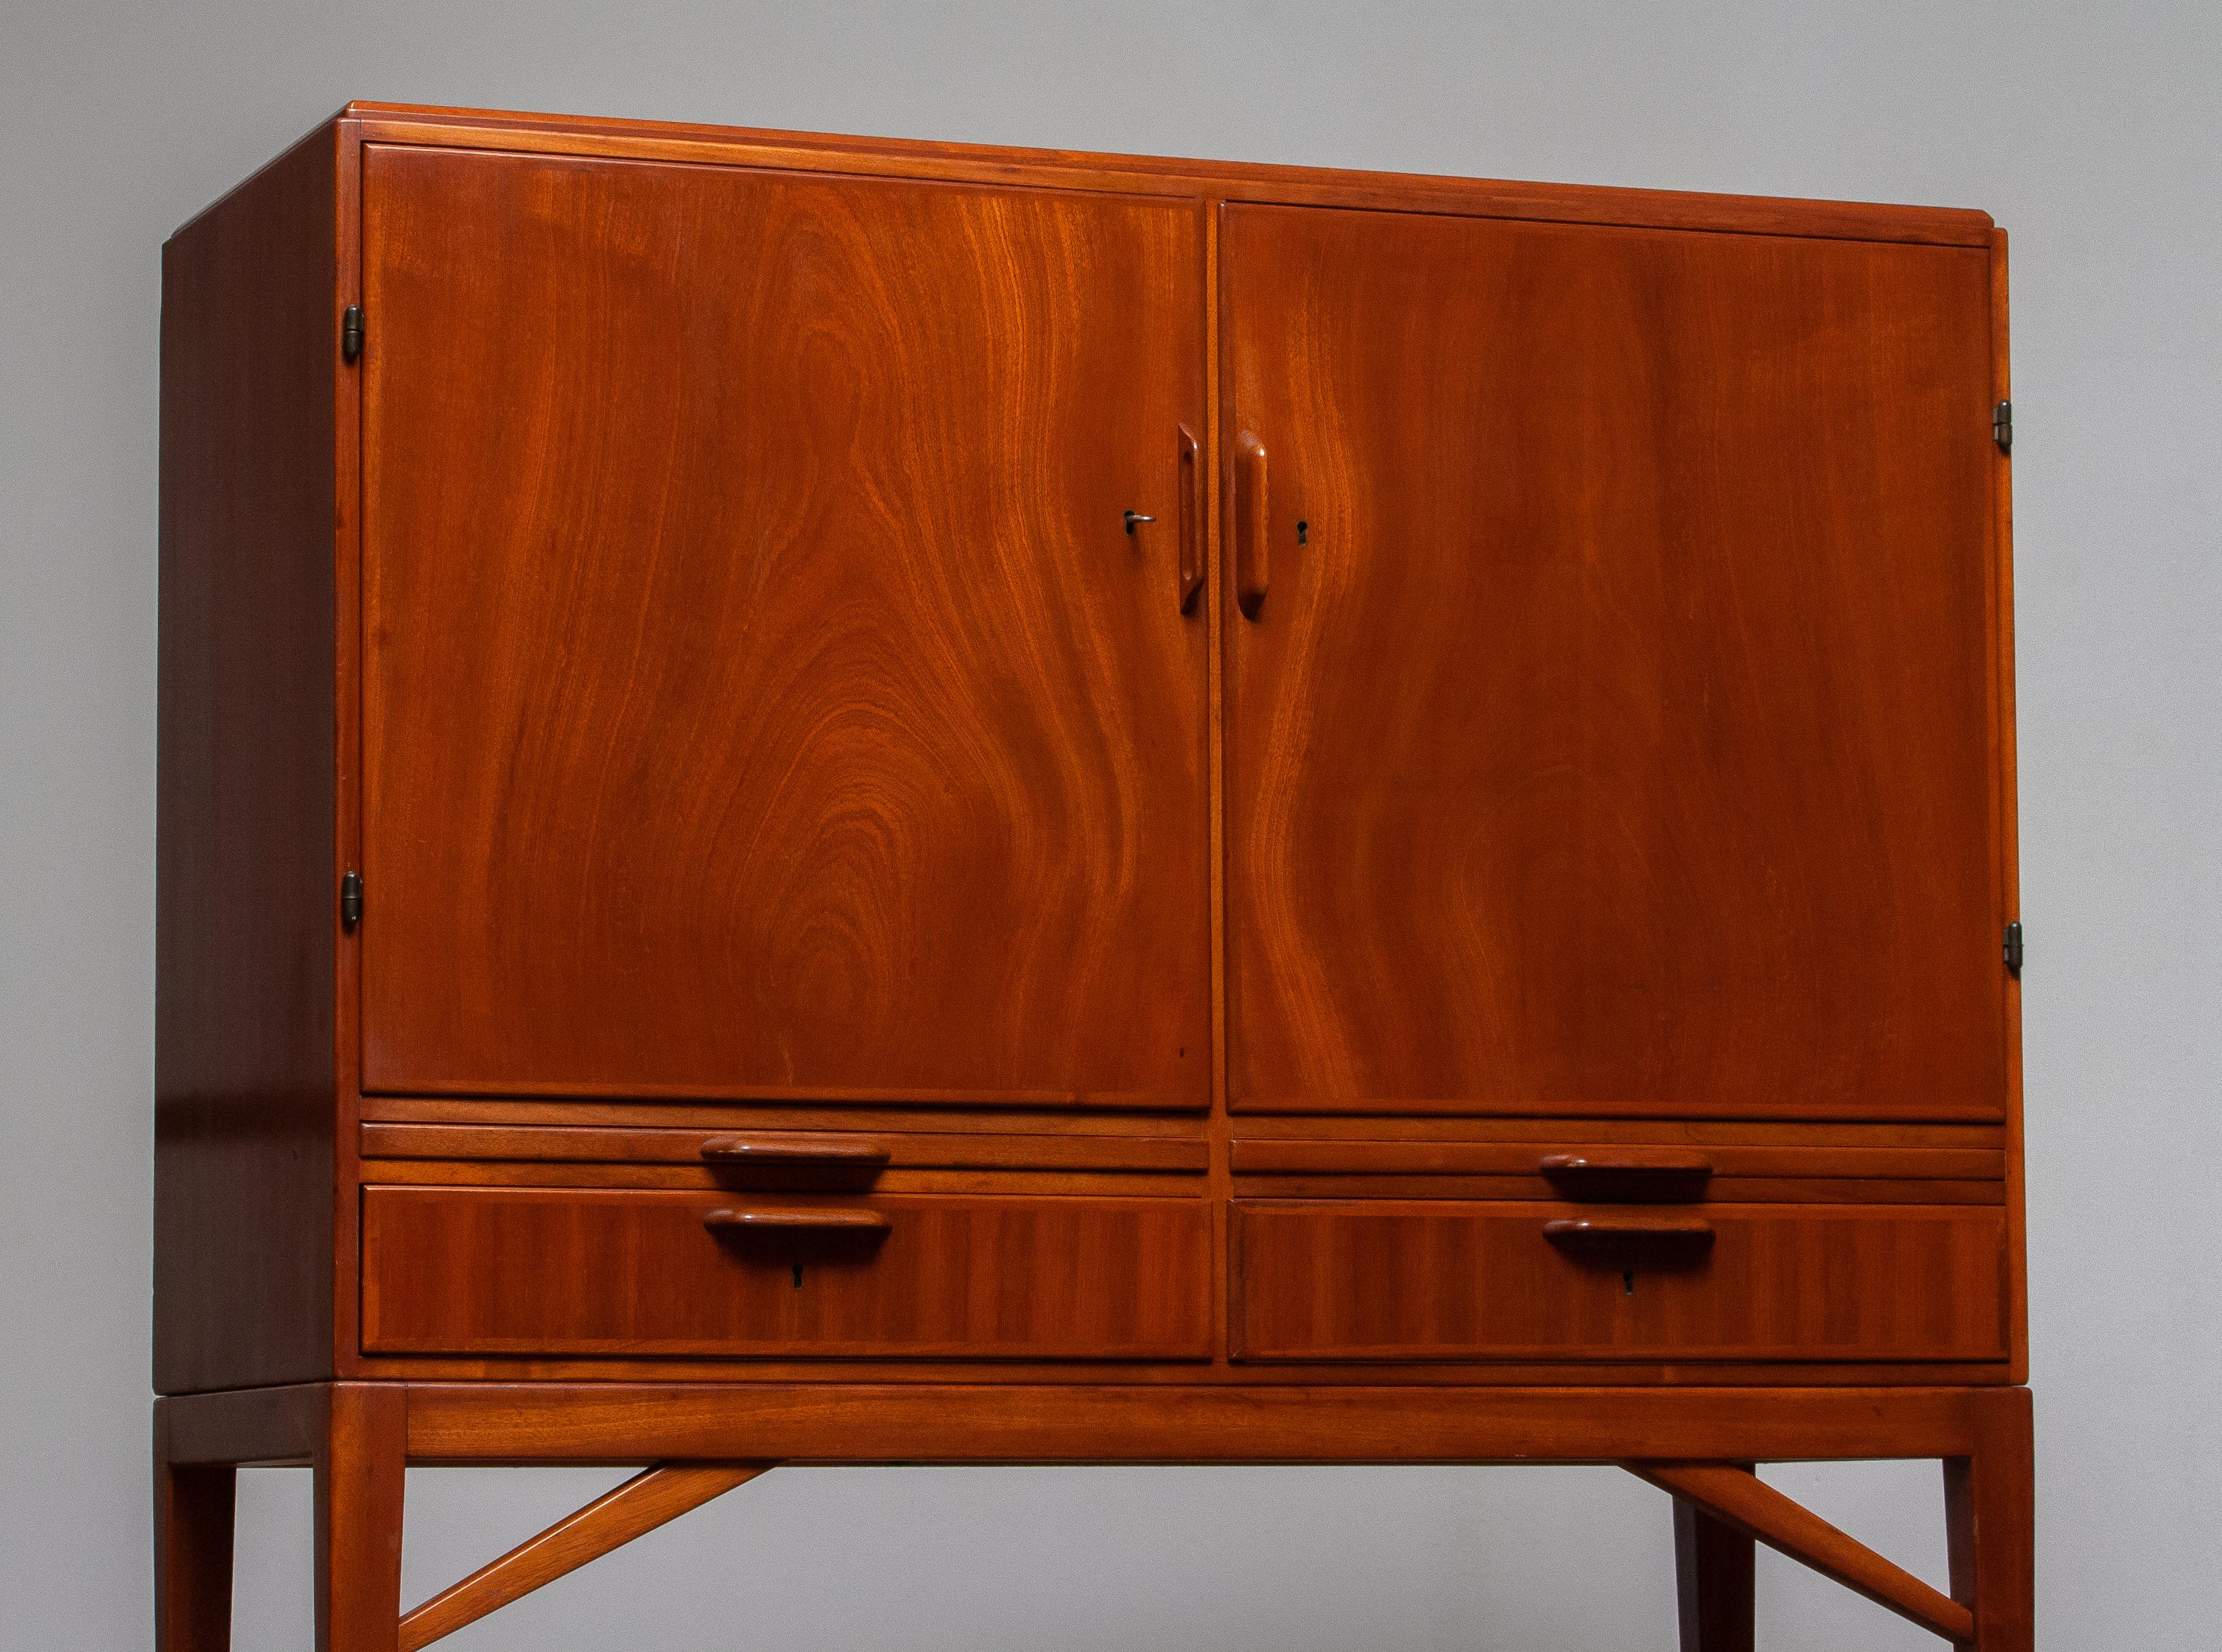 Mid-Century Modern 1950s, High Quality Mahogany Dry Bar / Cabinet Made by Marbo Sweden, SMI Labeled